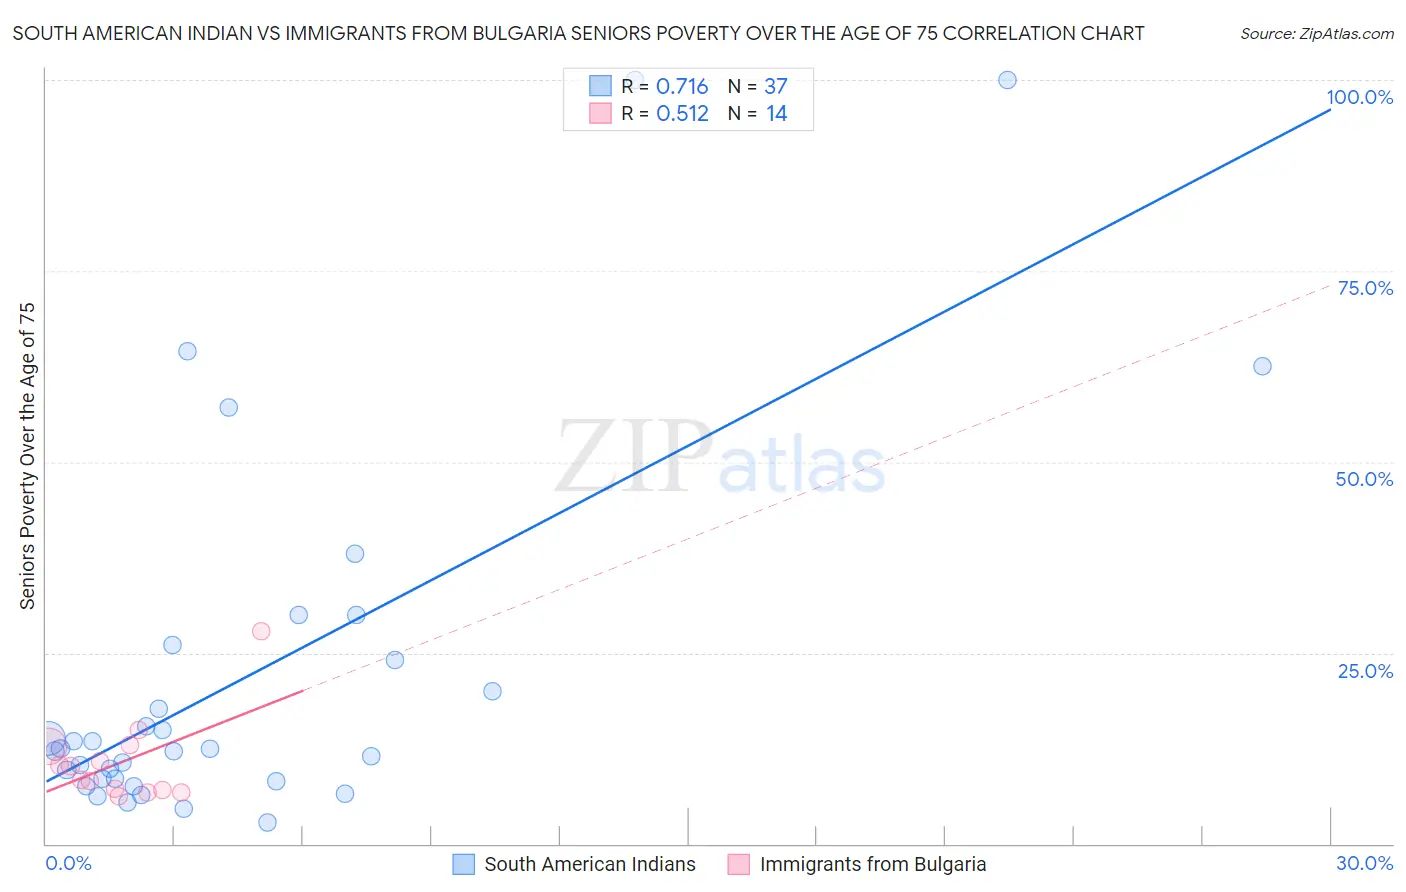 South American Indian vs Immigrants from Bulgaria Seniors Poverty Over the Age of 75